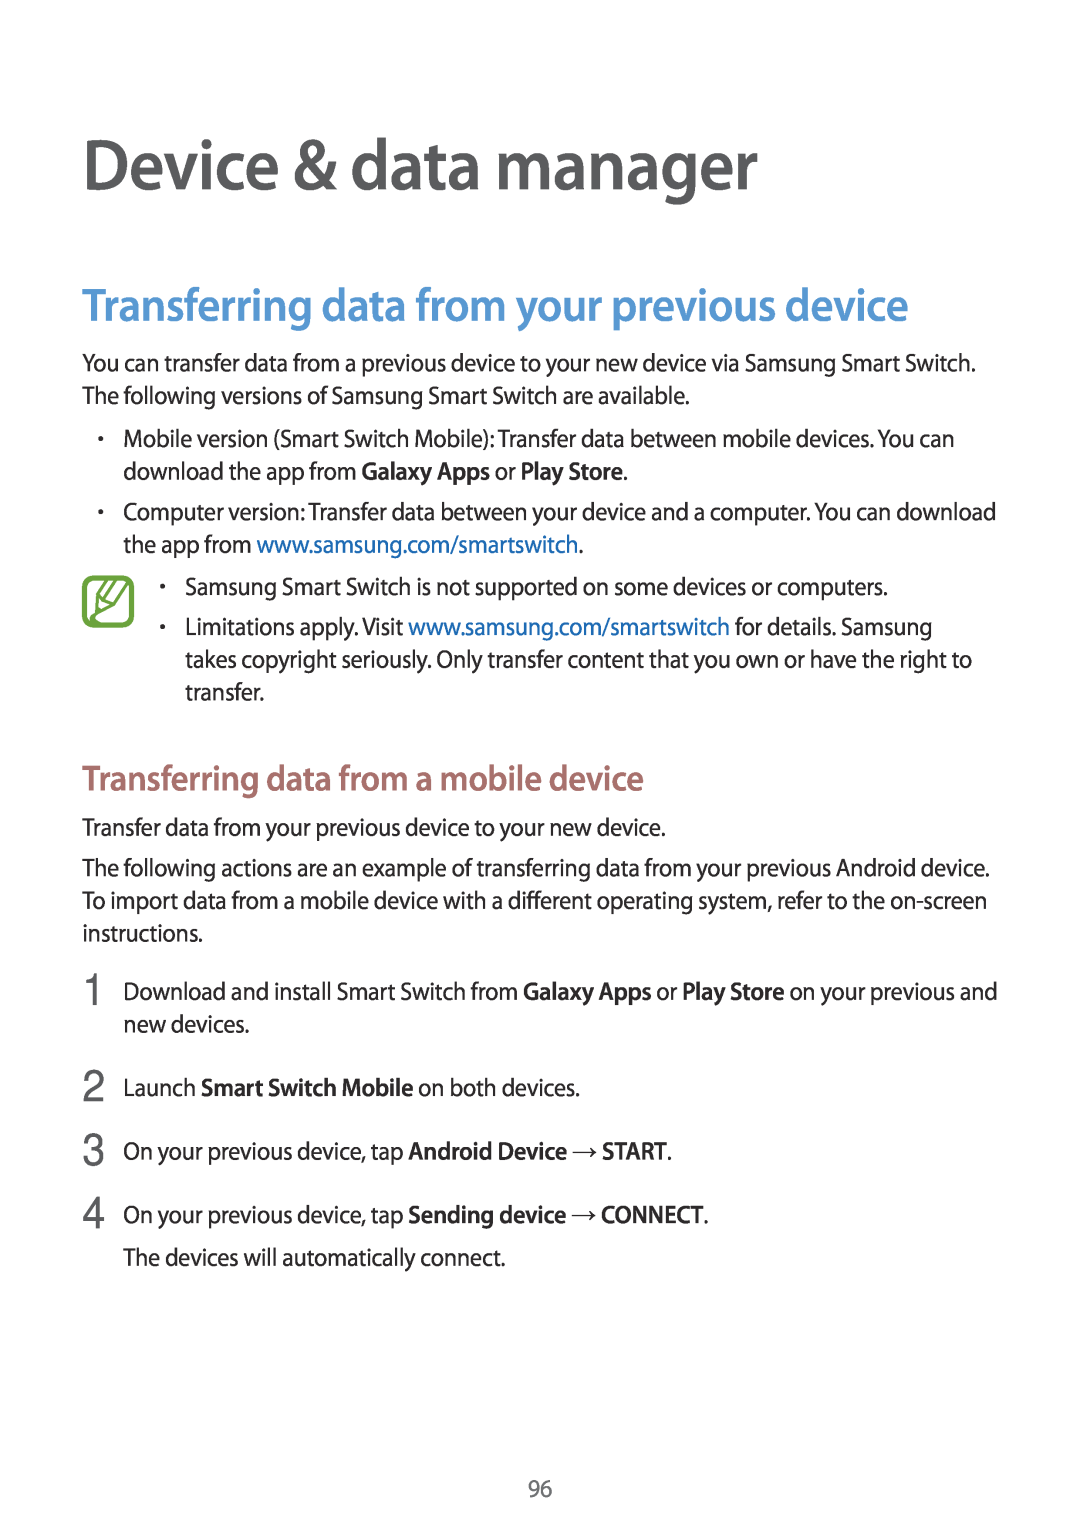 Samsung SM-P550NZKABTU, SM-P550NZKALUX, SM-P550NZWACHN Device & data manager, Transferring data from your previous device 